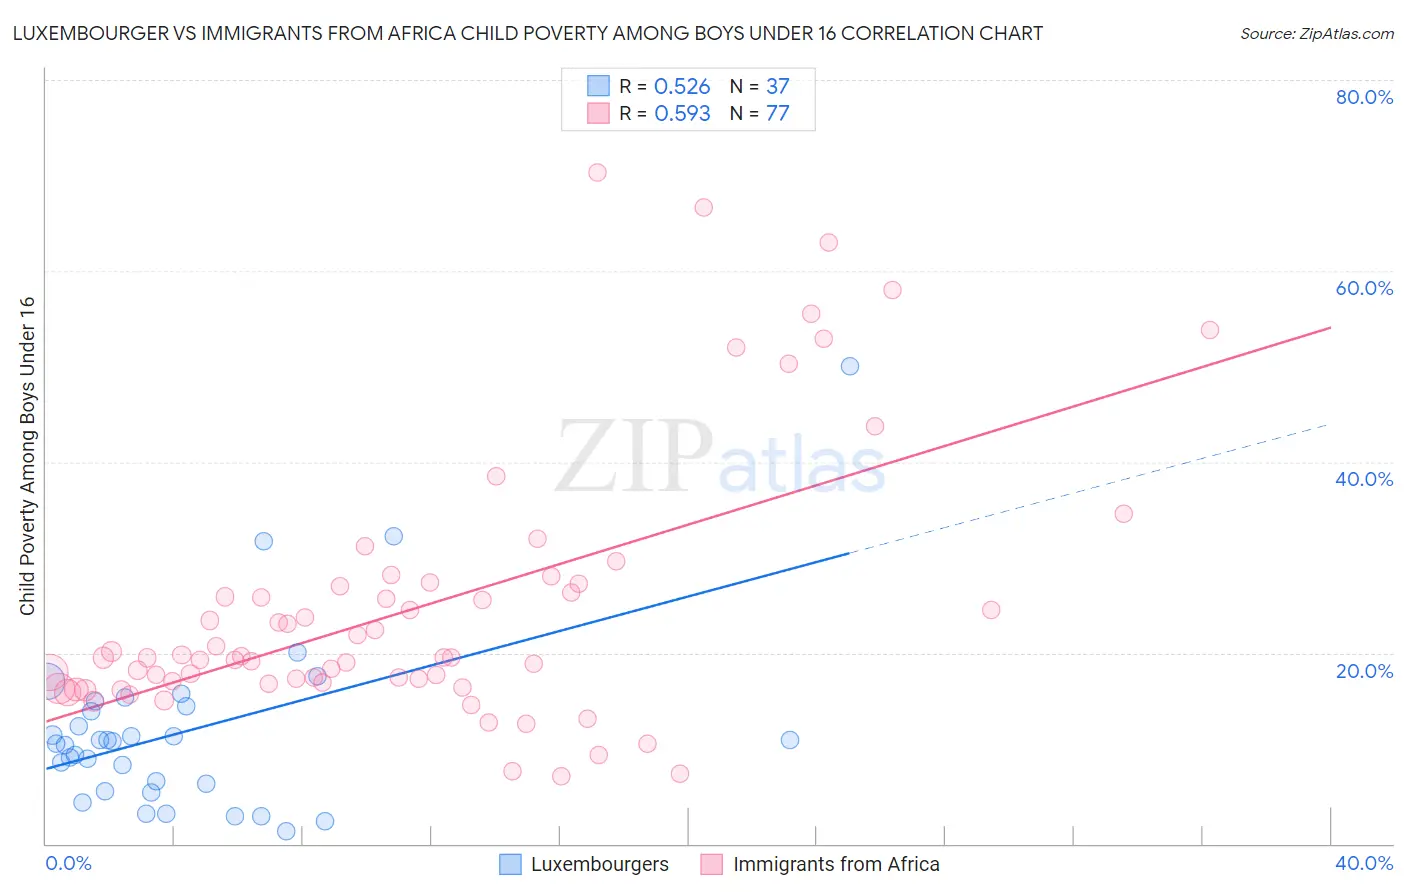 Luxembourger vs Immigrants from Africa Child Poverty Among Boys Under 16